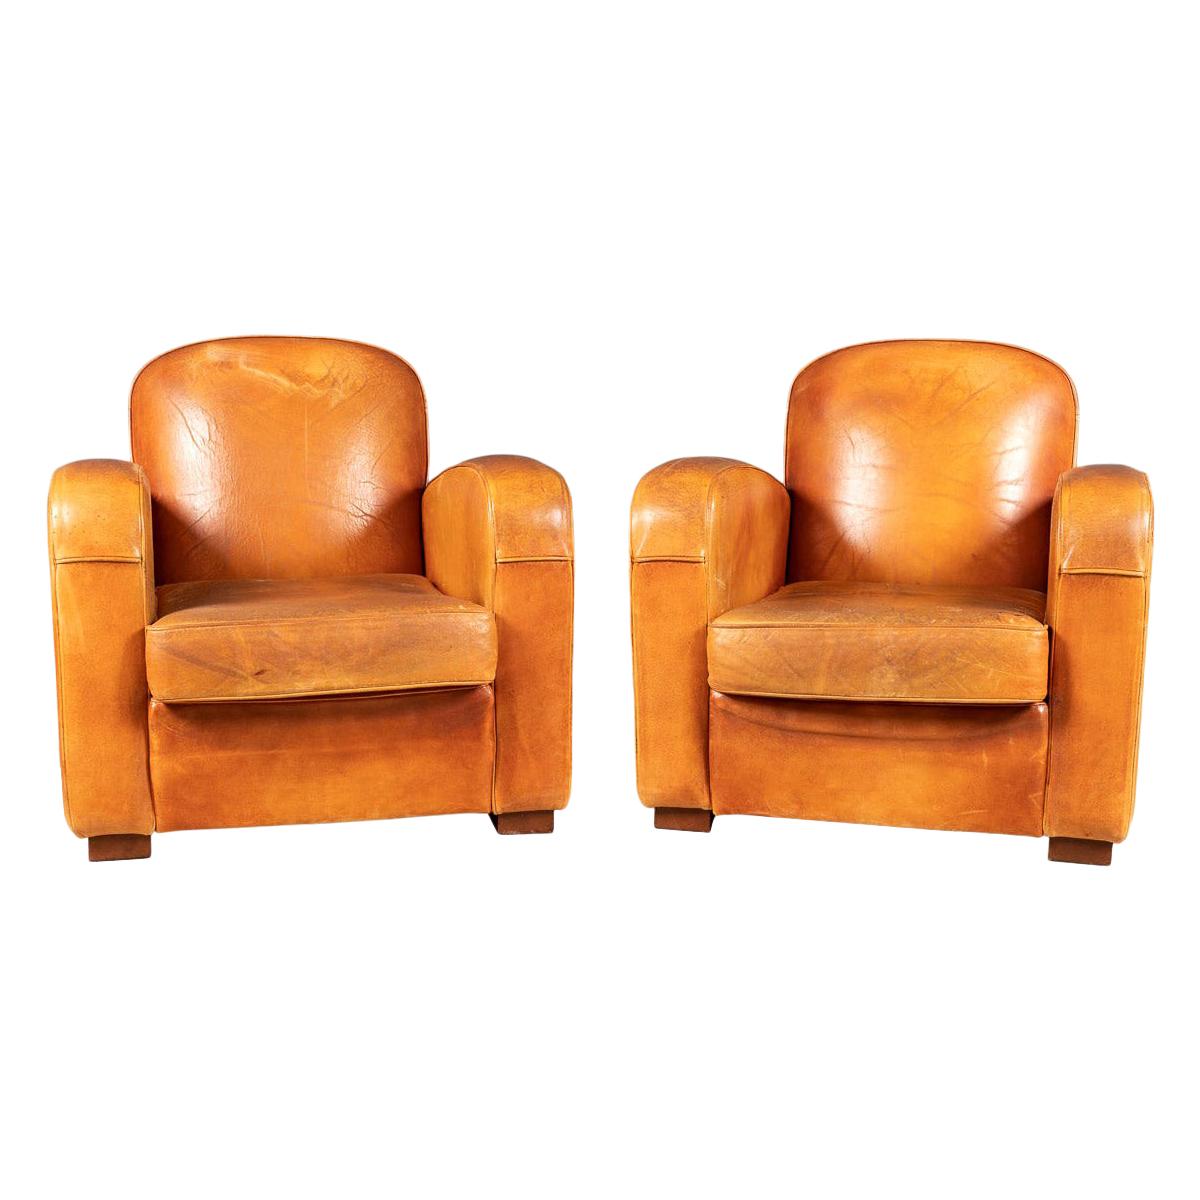 20th Century Pair of Art Deco Style French Leather Club Chairs